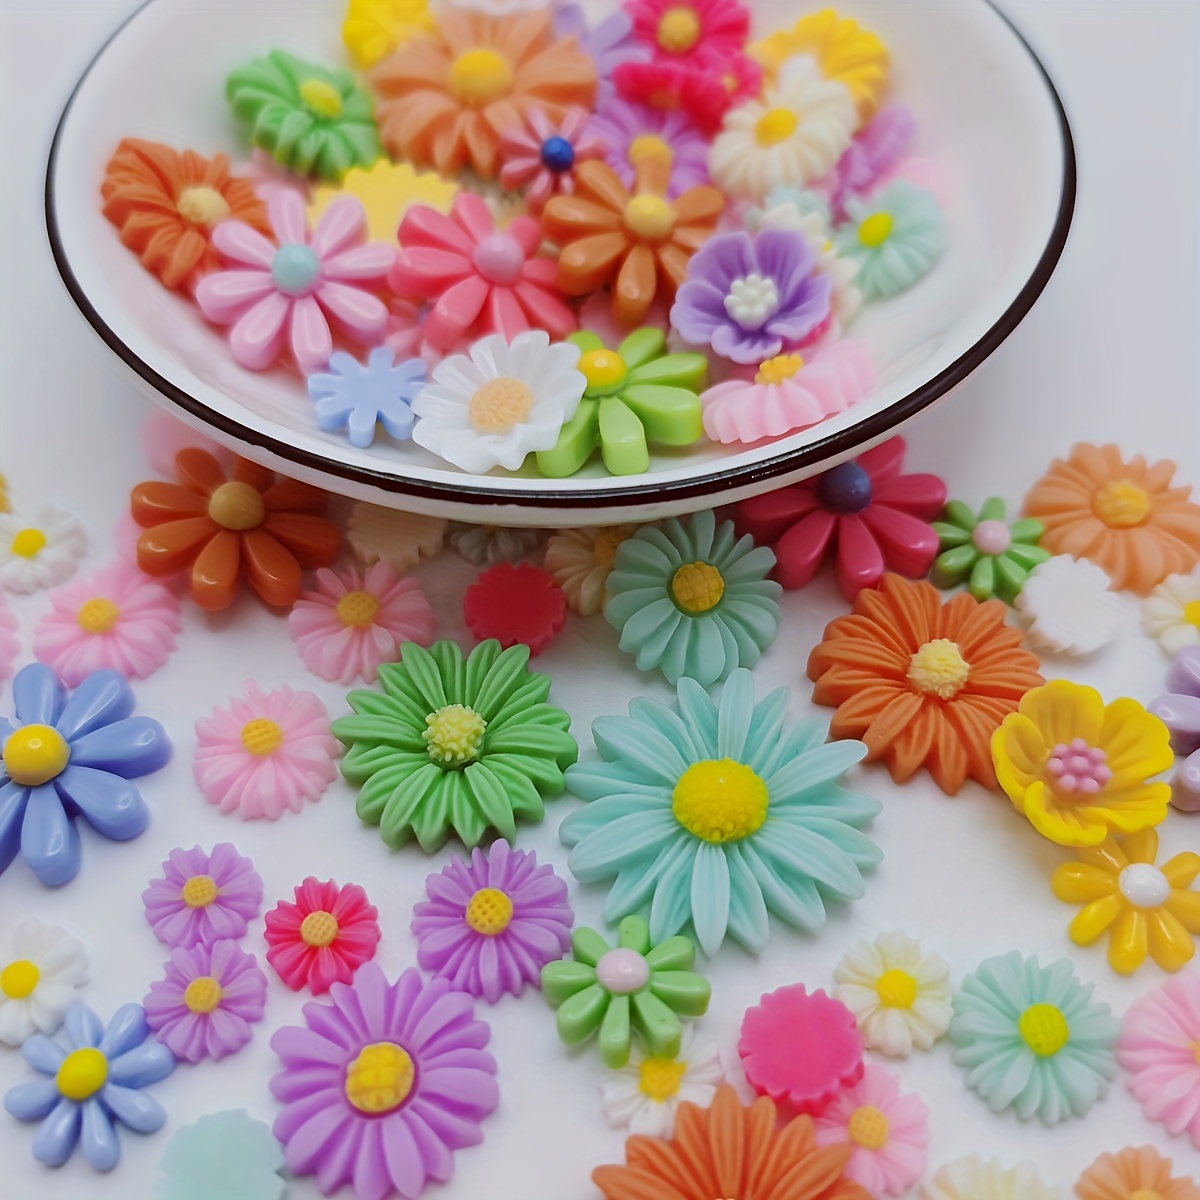 

50pcs 10~26mm Mix Sizes Resin Daisy Flowers Flatbacks Cabochons Sunflower Charms Diy Crafts For Easter Cardmaking Decorations Diy Jewelry Making